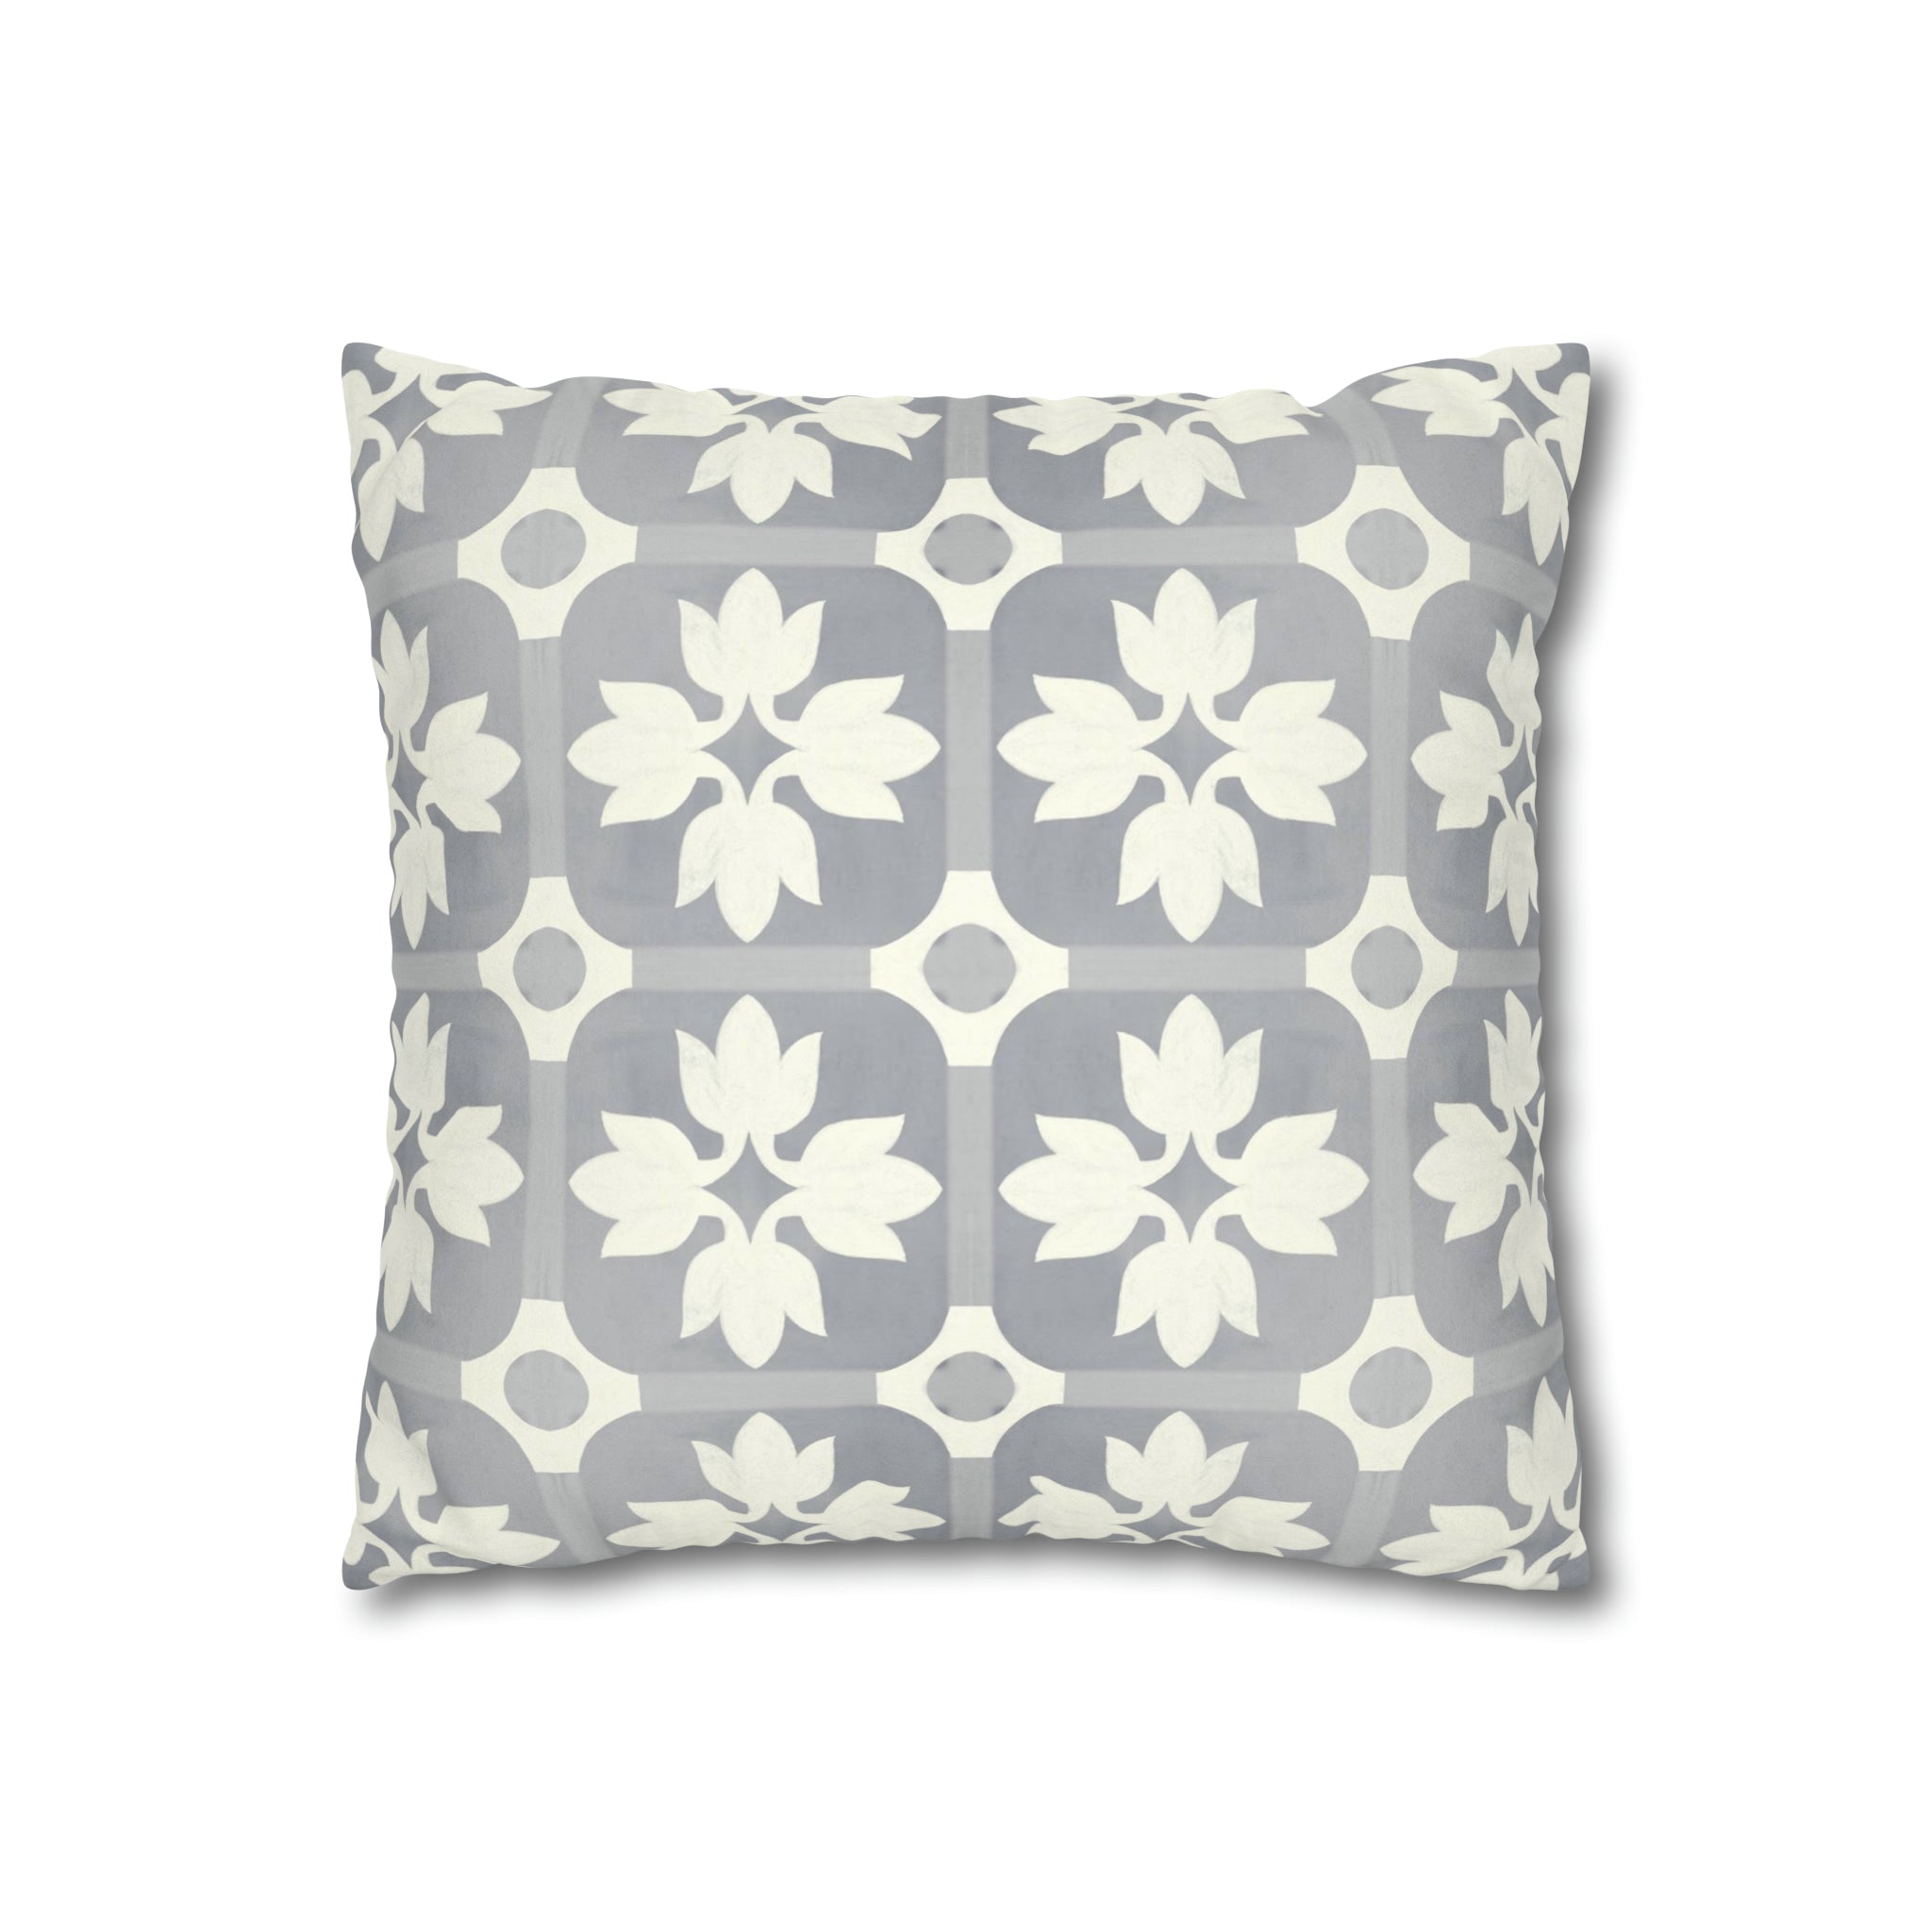 Margot Slate Microsuede Square Pillow Cover